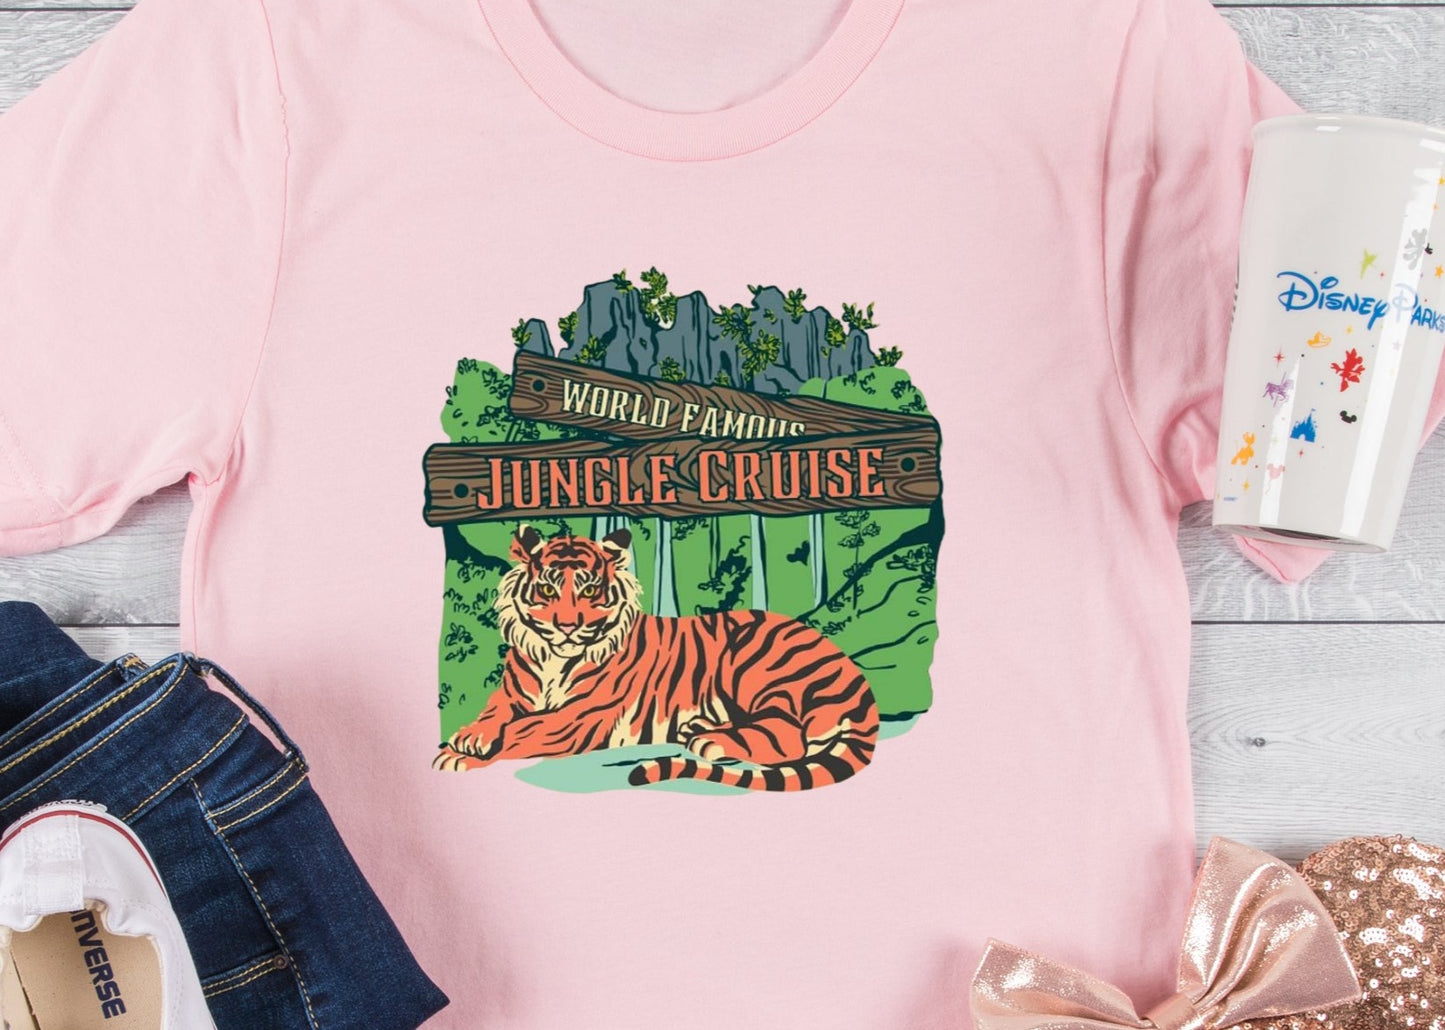 * World Famous Jungle Cruise Decal